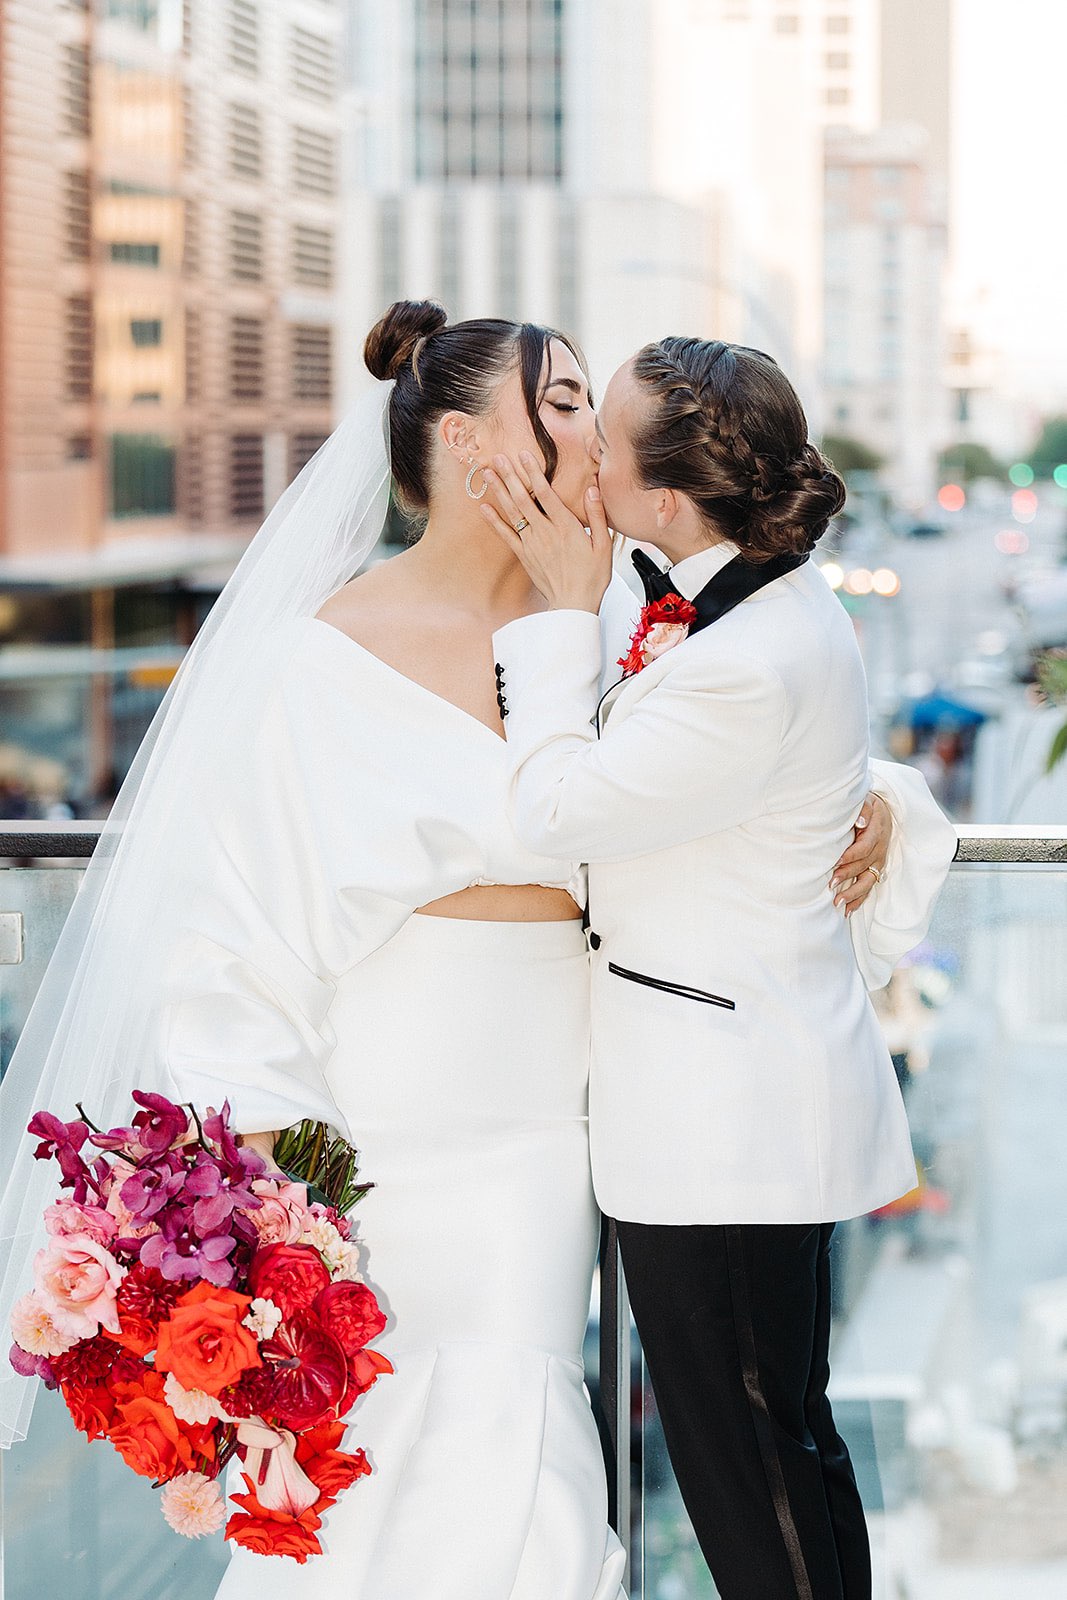 Brides kissing on rooftop wedding venue while holding red bouquet